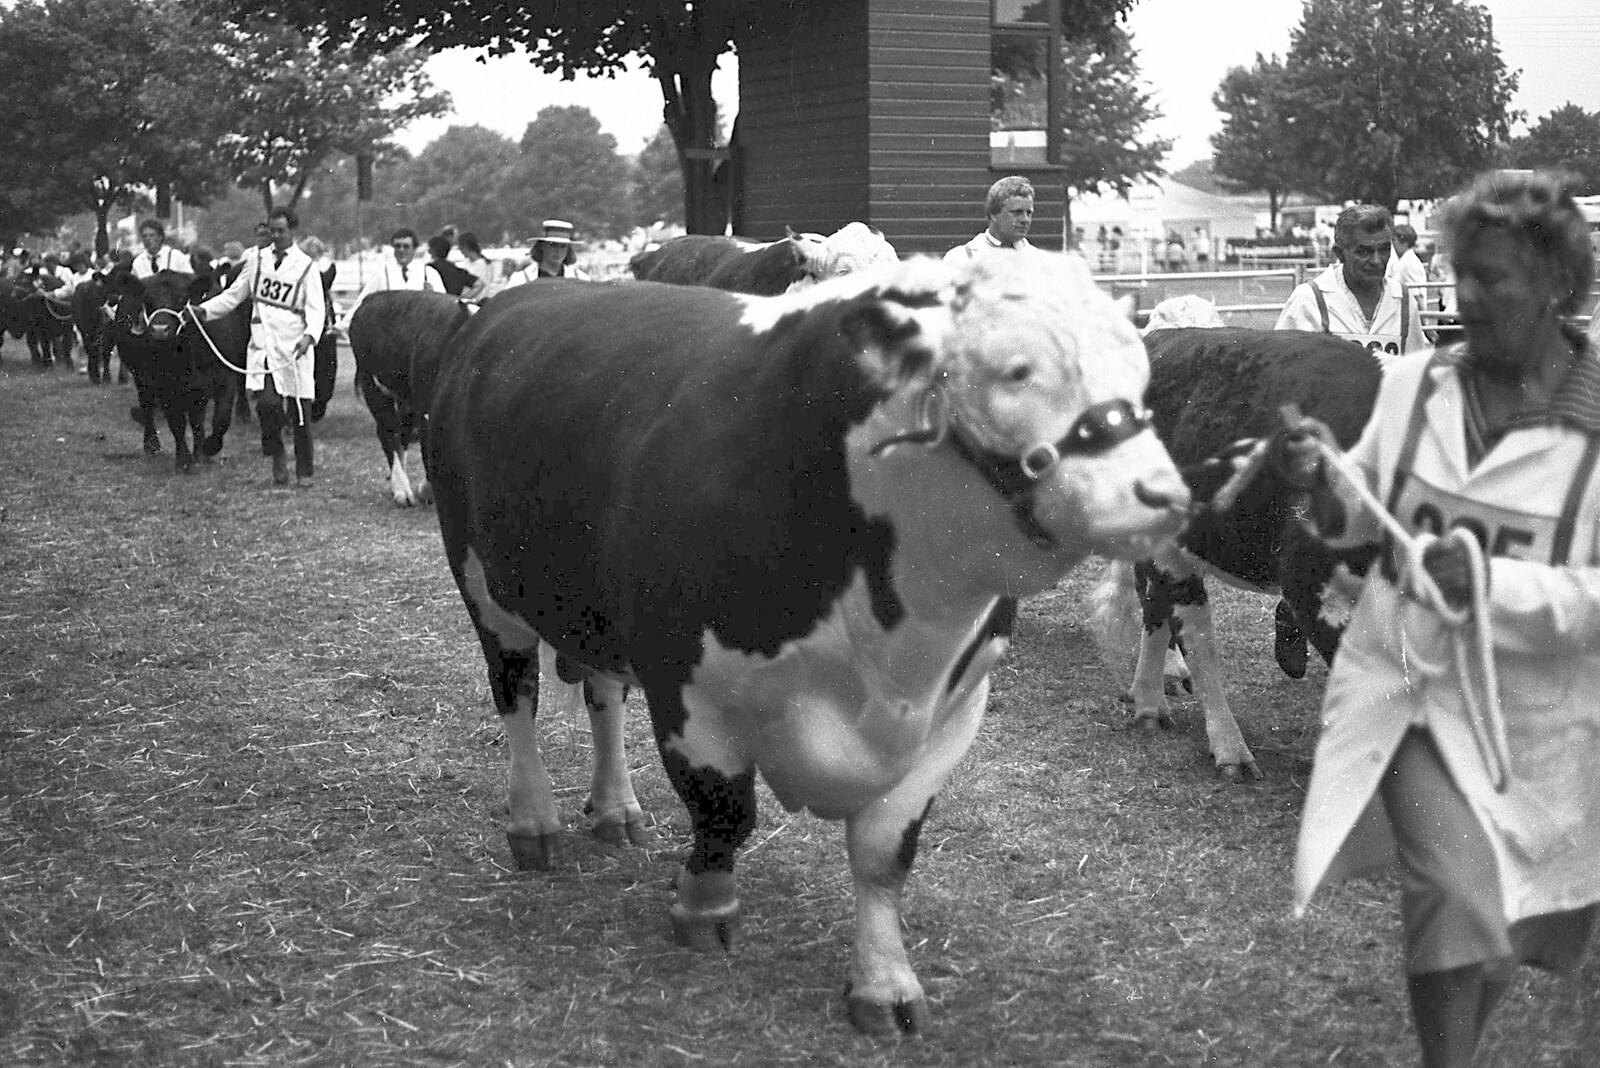 The Royal Norfolk Show, Costessey, Norwich - June 20th 1994: A procession of bulls